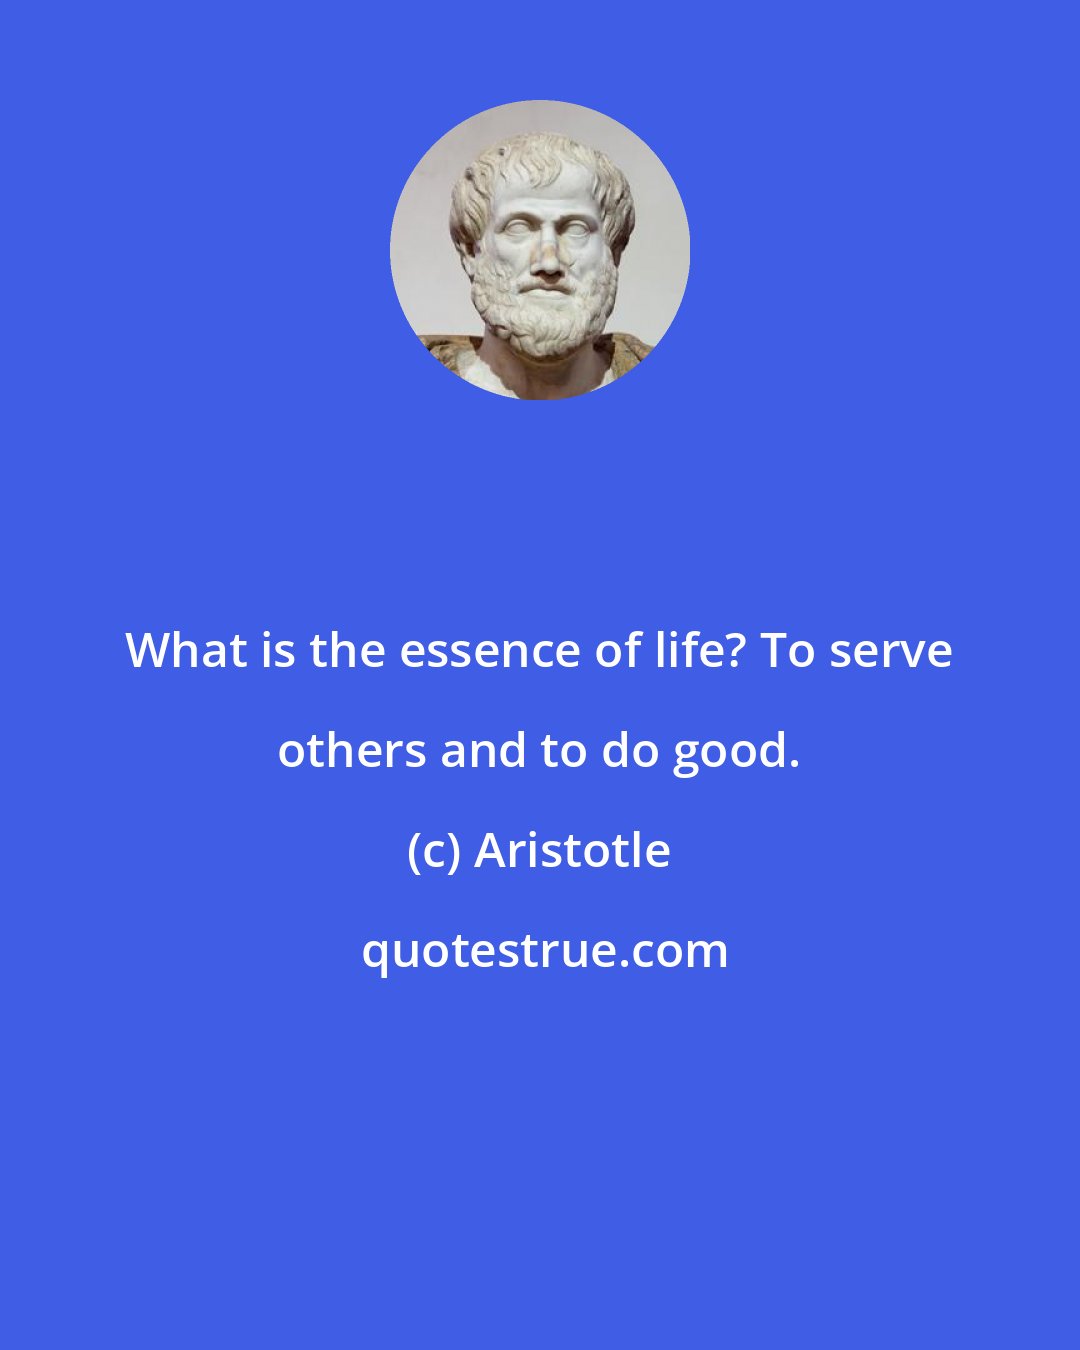 Aristotle: What is the essence of life? To serve others and to do good.